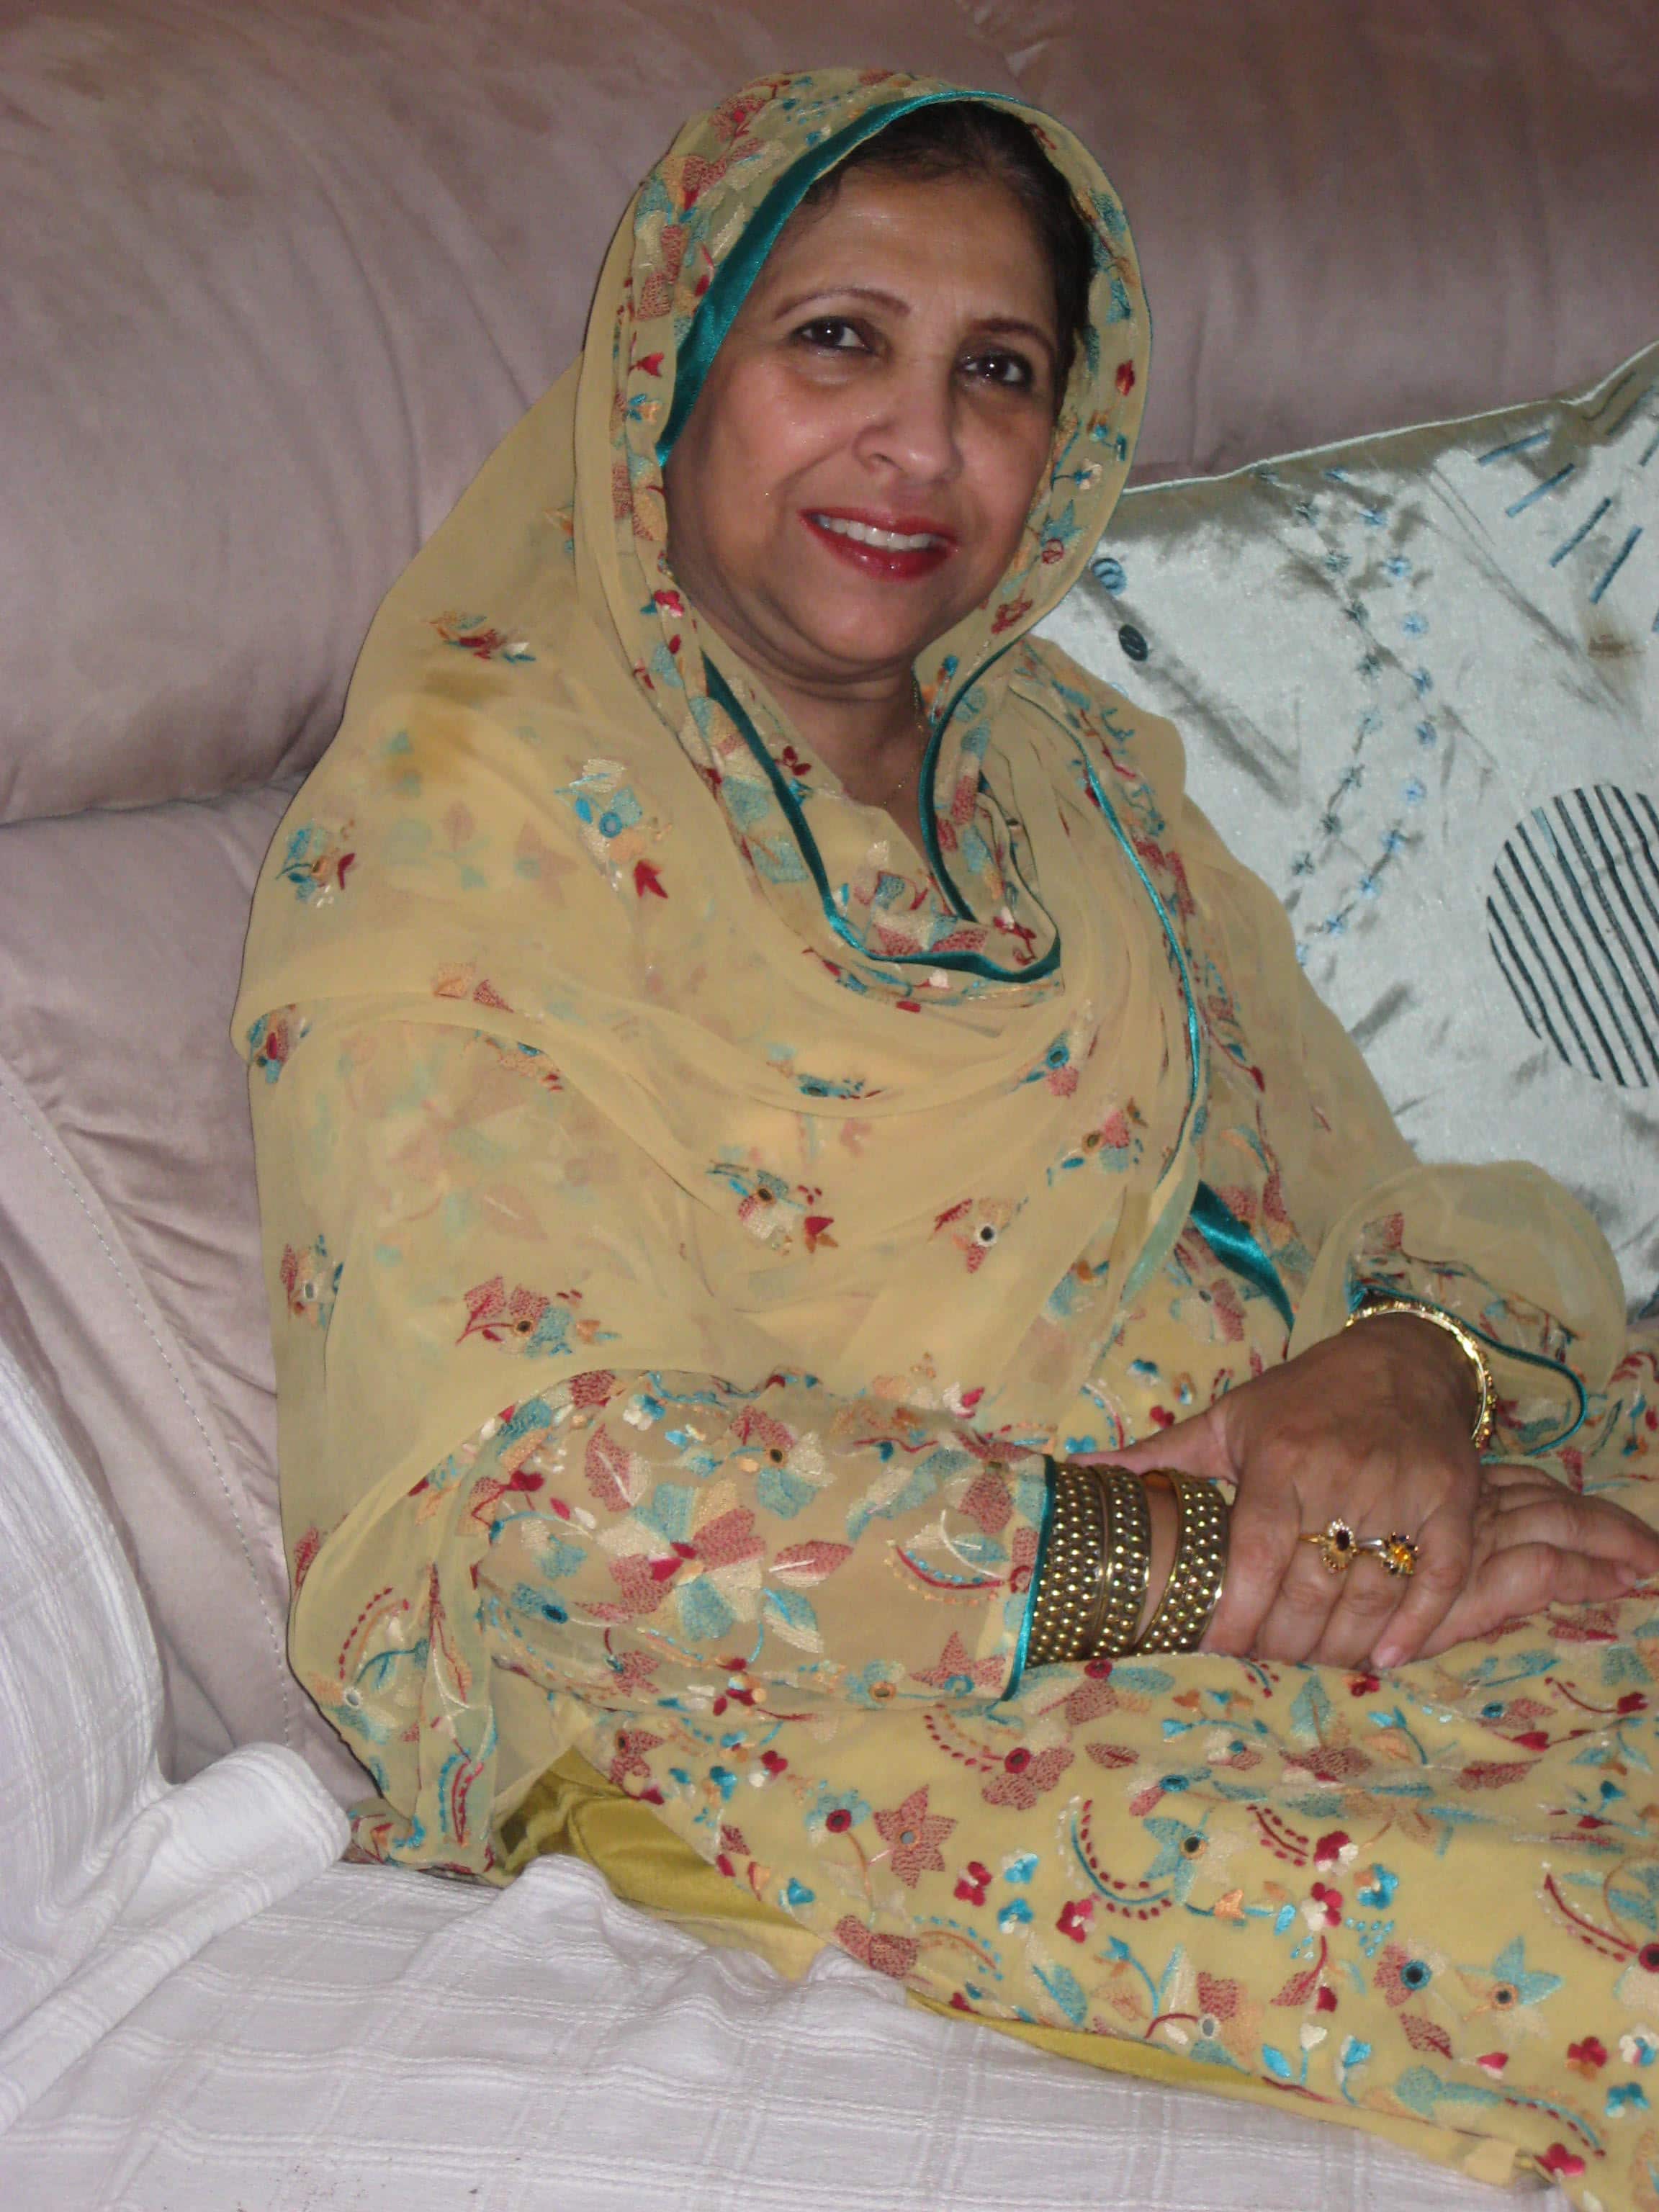 Sabeena inspired her mother (pictured) to buy Fair Trade products. 